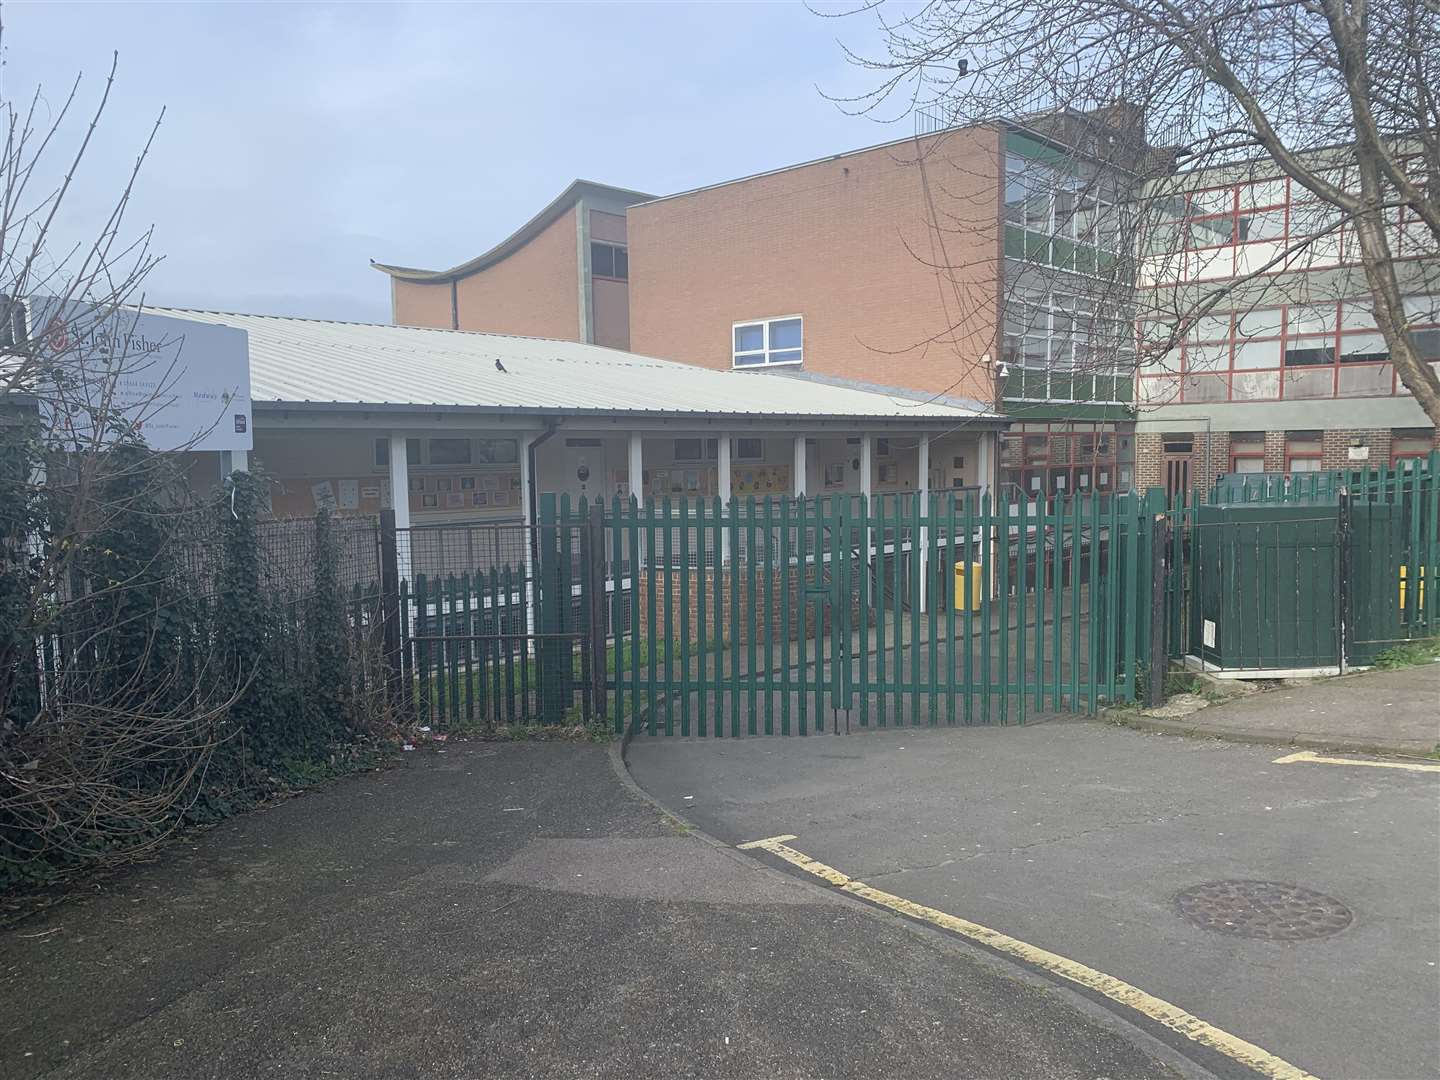 St John Fisher school is based across two sites in Chatham